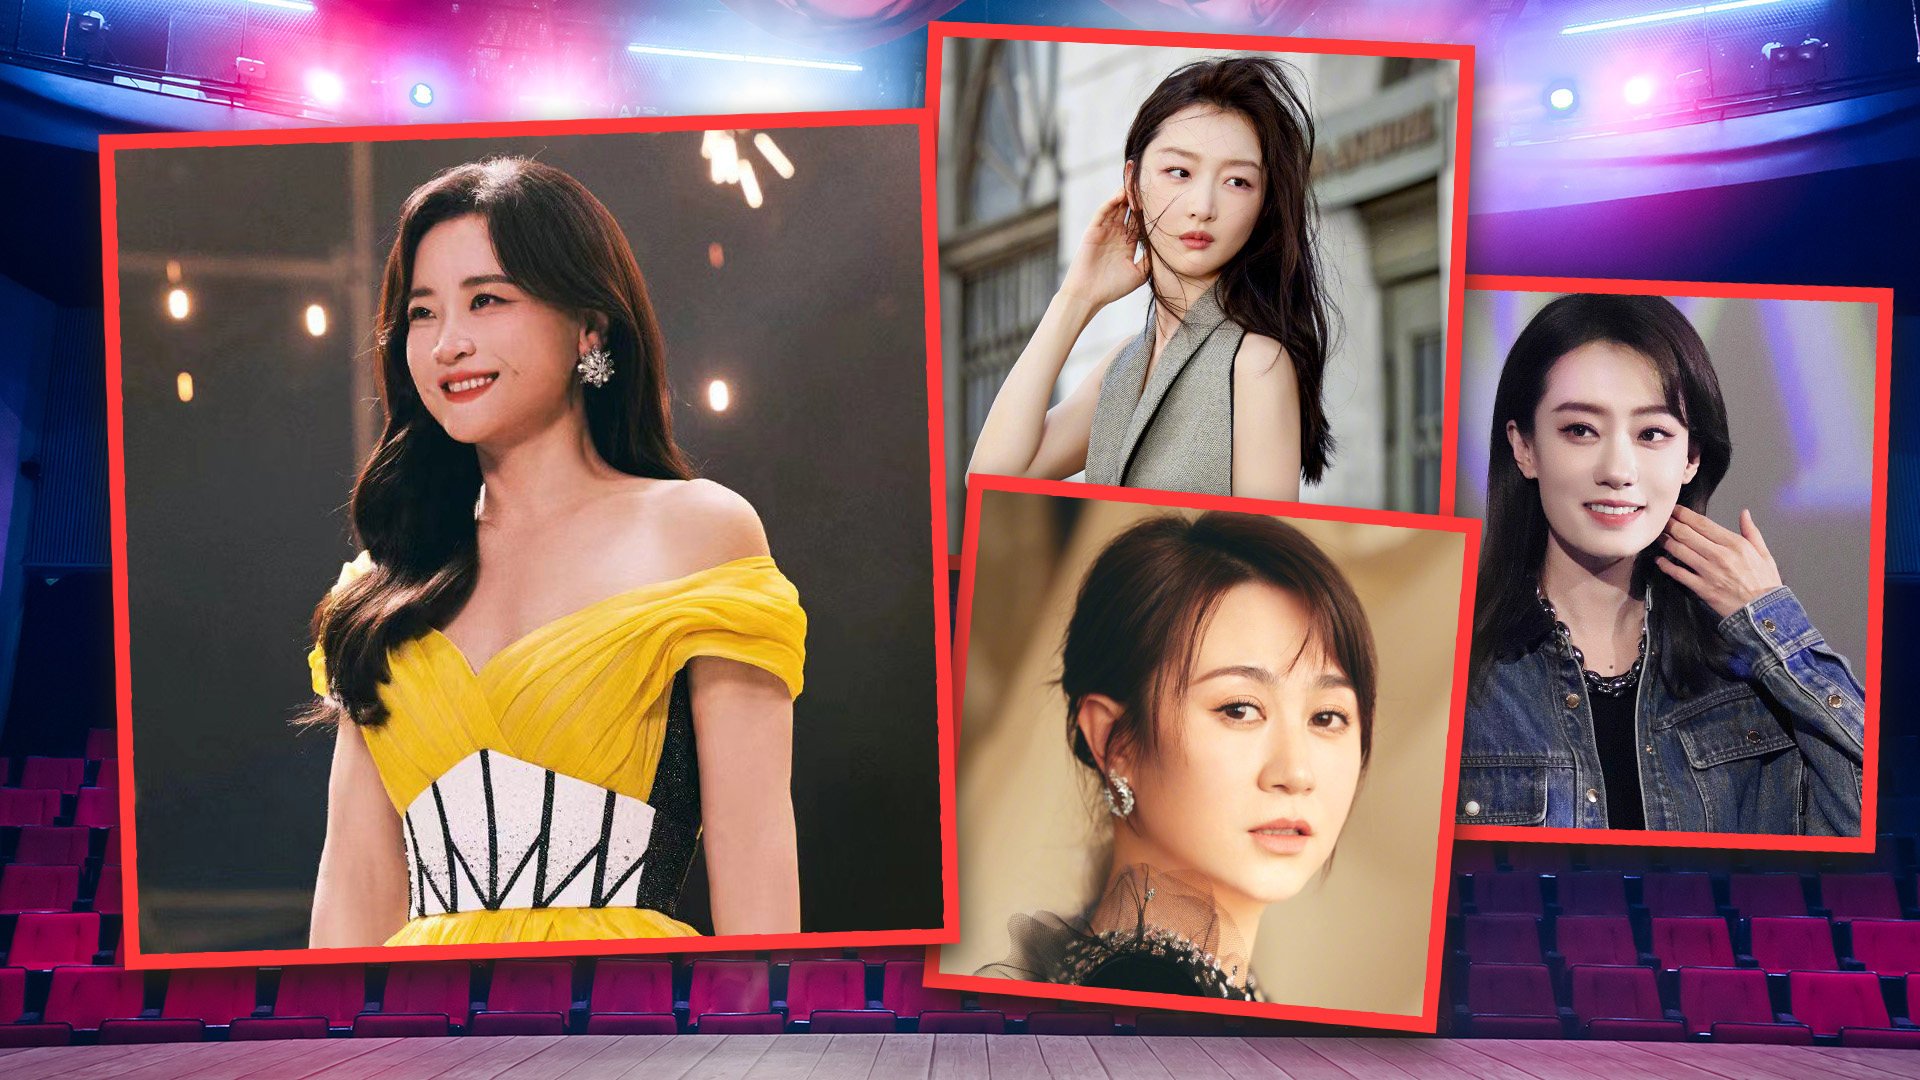 Actress-director, Jia Ling, far-left, has become the fourth female star in China to gross over US$1.4 billion at the box office in mainland film history after Zhou Dongyu, top middle, Zhang Xiaofei, far-right, and Ma Li, bottom middle. Photo: SCMP composite/Weibo